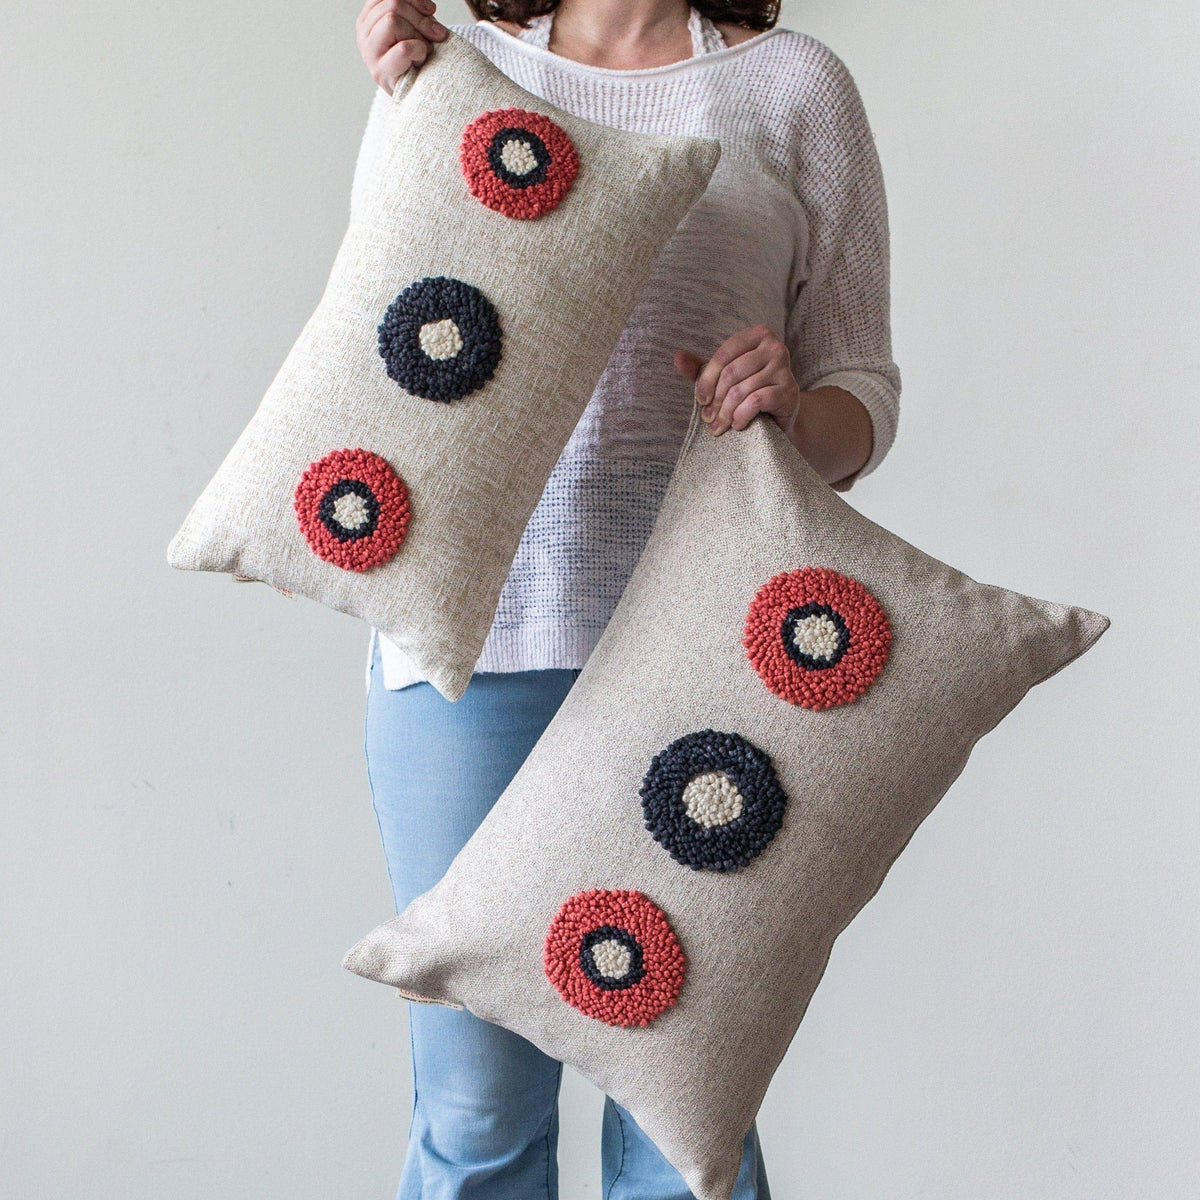 AfriScandi Circles Pillow kanju Interiors African décor handmade natural organic color accent pillow cushion throw decorative lounge comfortable comfy unique modern contemporary stylish soft accent durable minimal couch chair bed handmade luxury thick plush yarn texture punch needle knitting simplicity original embroidered South Africa quality cotton cream black white tangerine